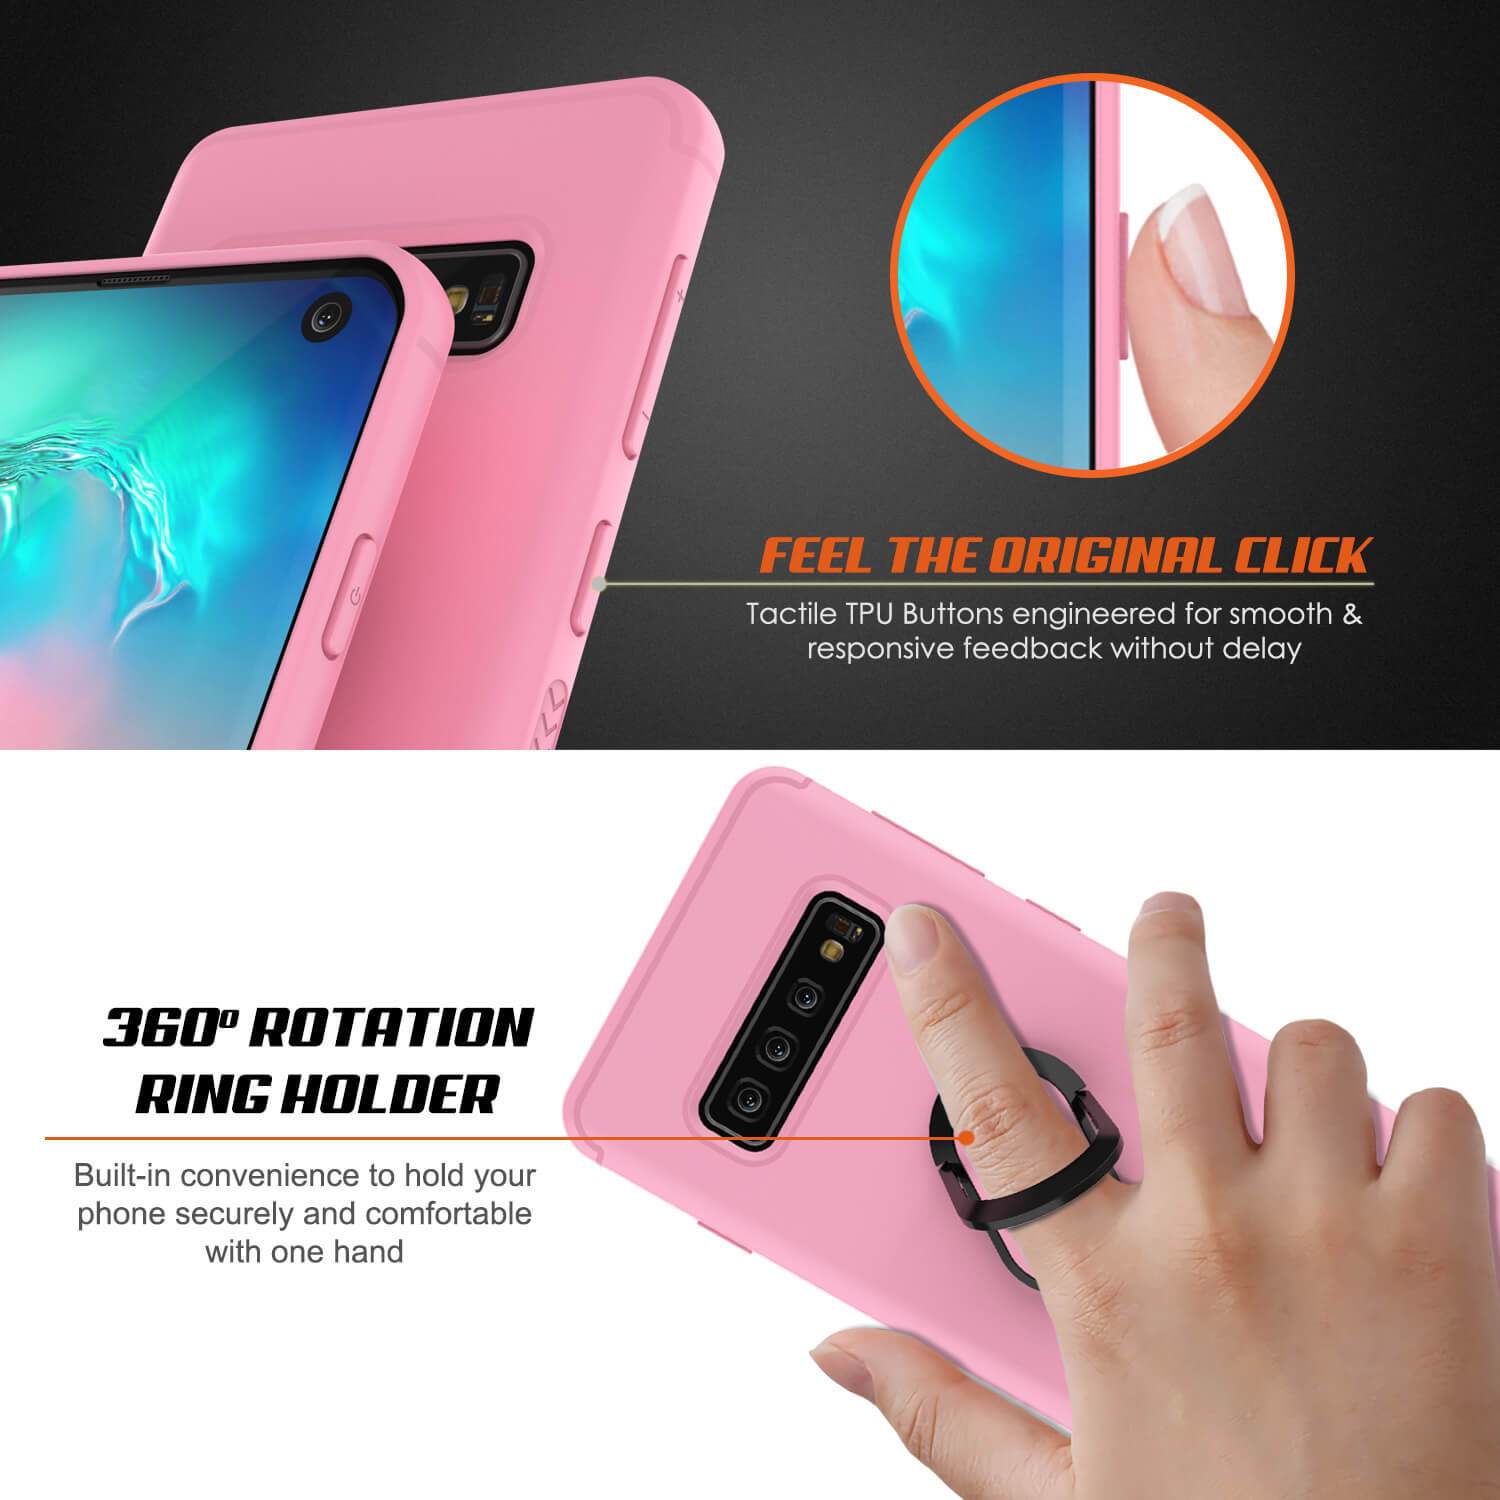 Galaxy S10 Case, Punkcase Magnetix Protective TPU Cover W/ Kickstand, Sceen Protector[Pink]